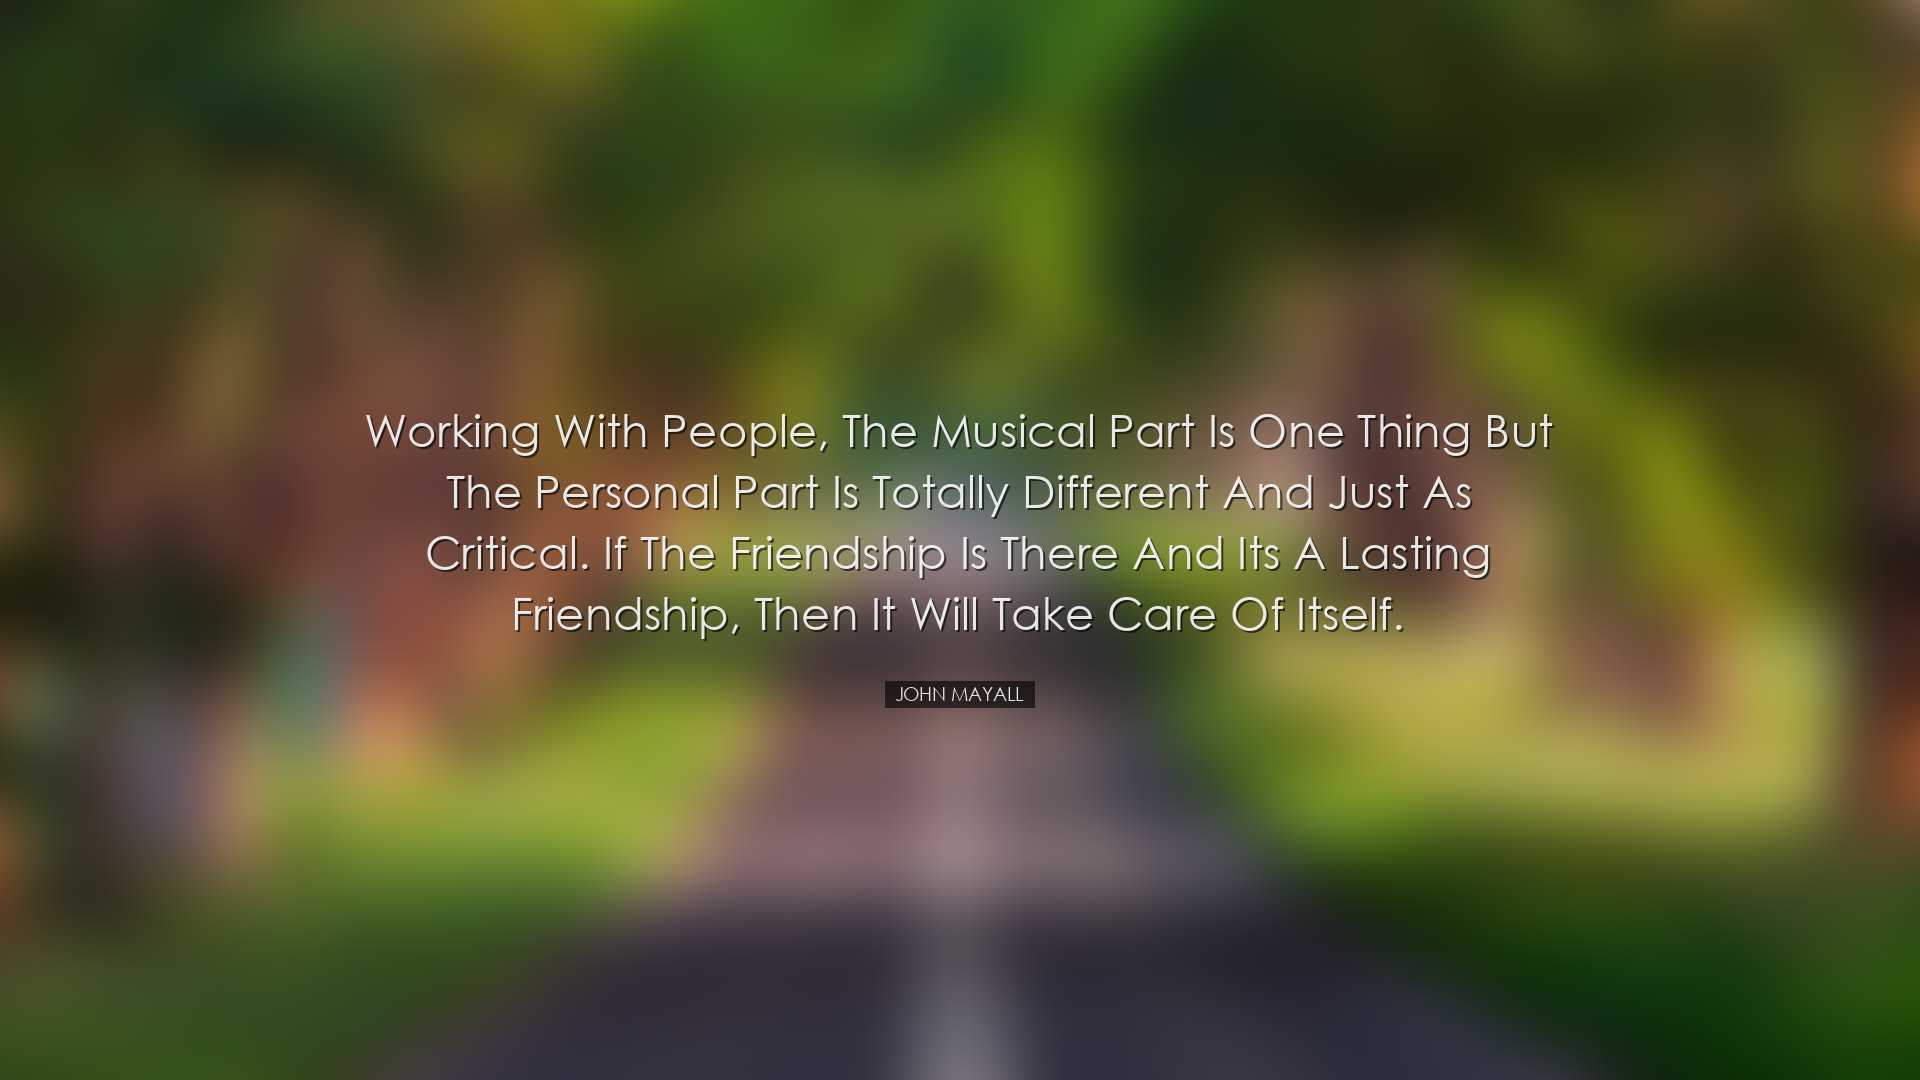 Working with people, the musical part is one thing but the persona